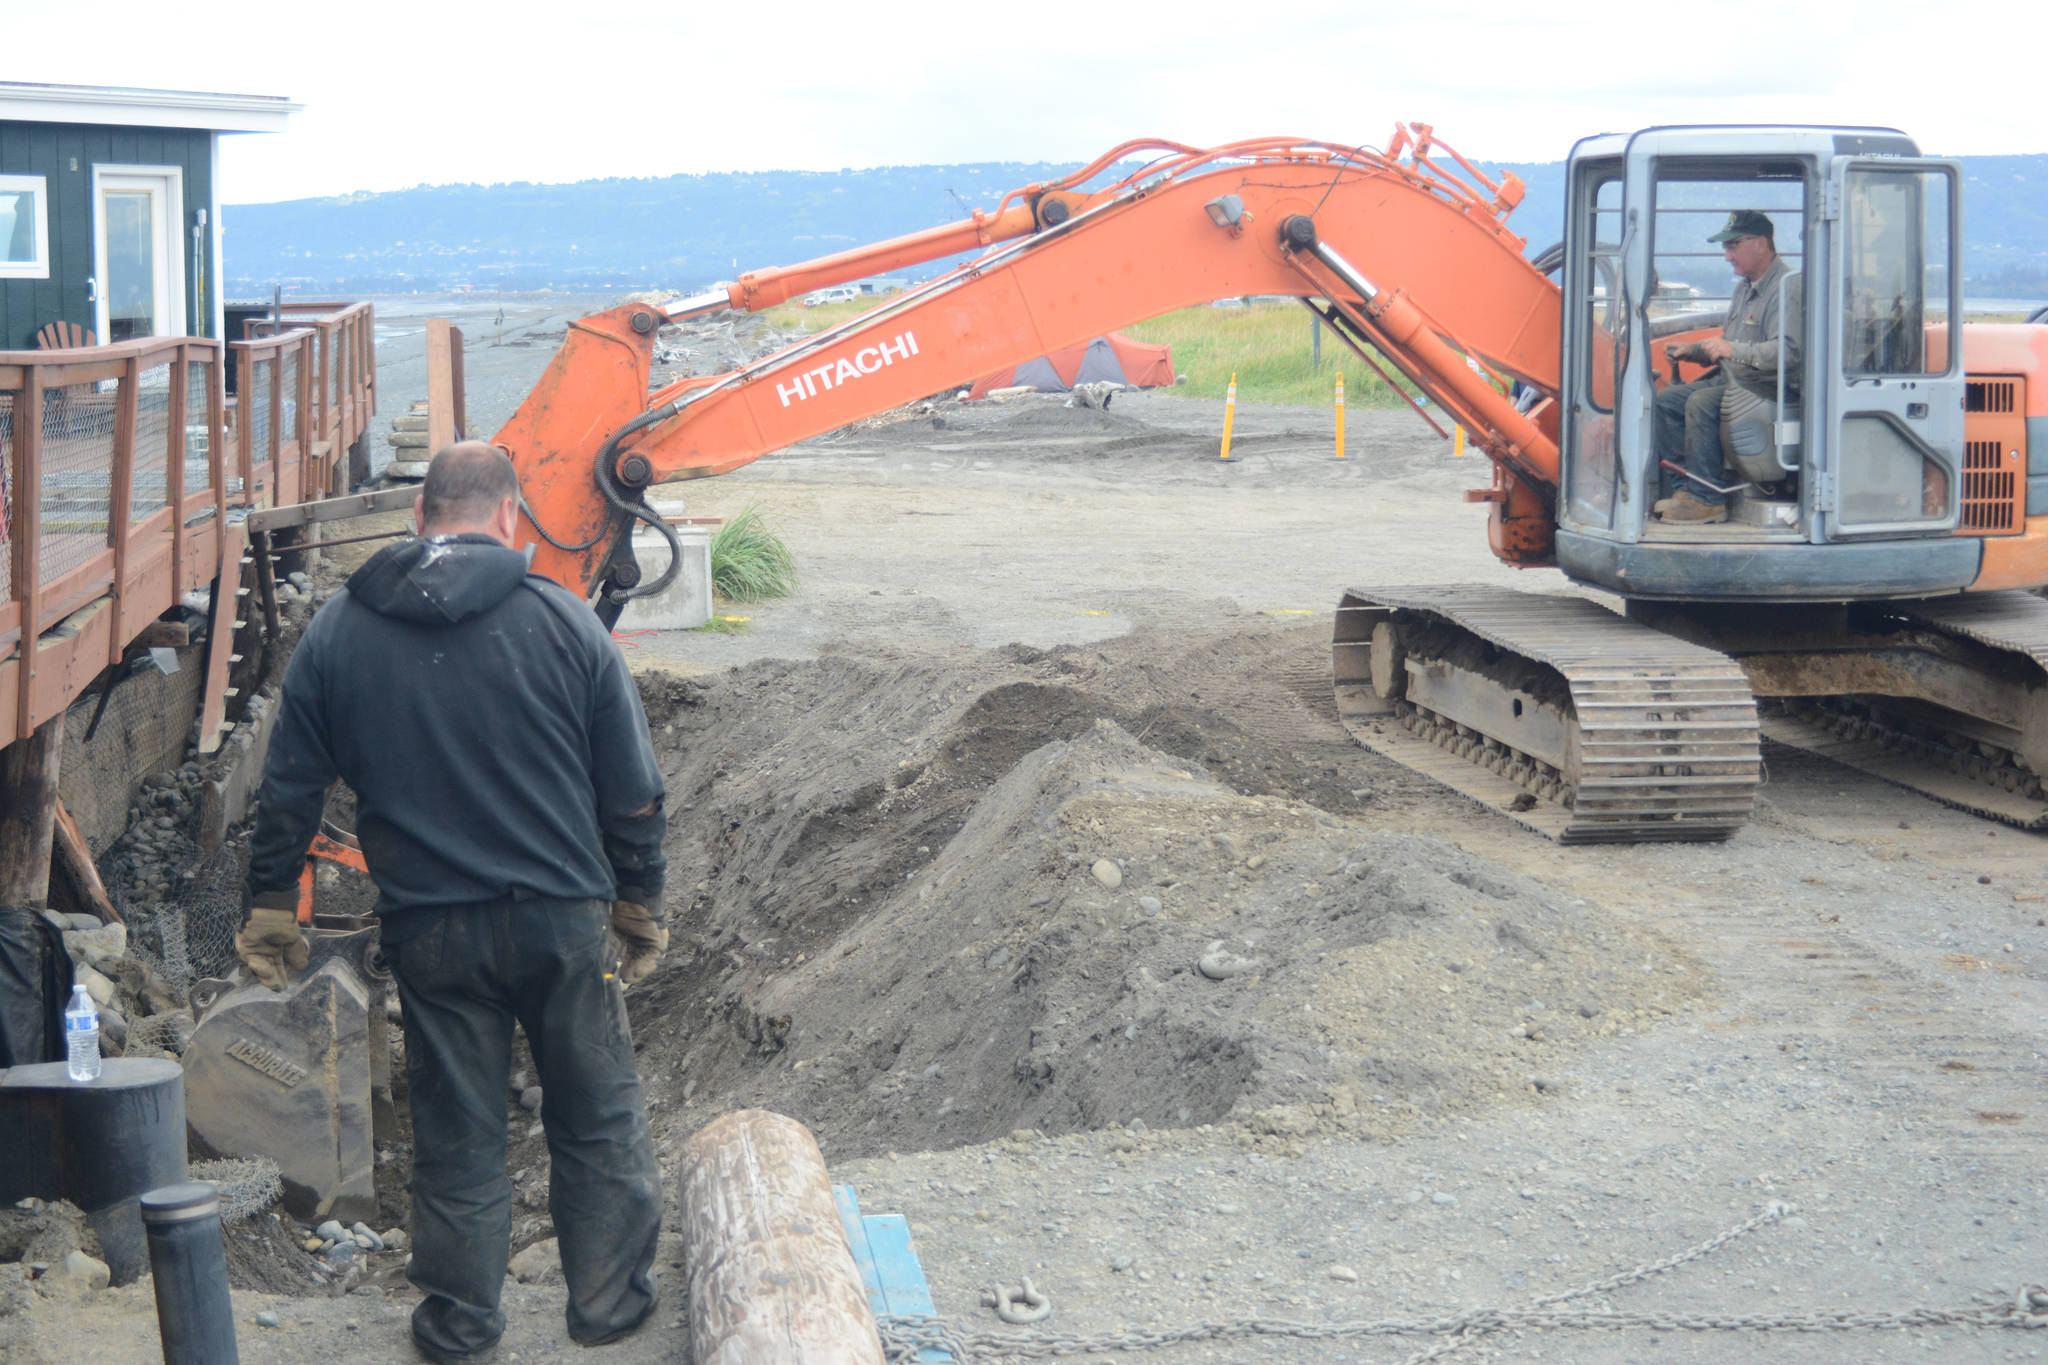 John Wise, left, and Nathan Wise, right, in backhoe, make repairs of the Glacier Drive-In on the Homer Spit, on Aug. 16, 2018, after a series of storms that eroded the beach last week during high tides in Homer, Alaska. (Homer News file photo)